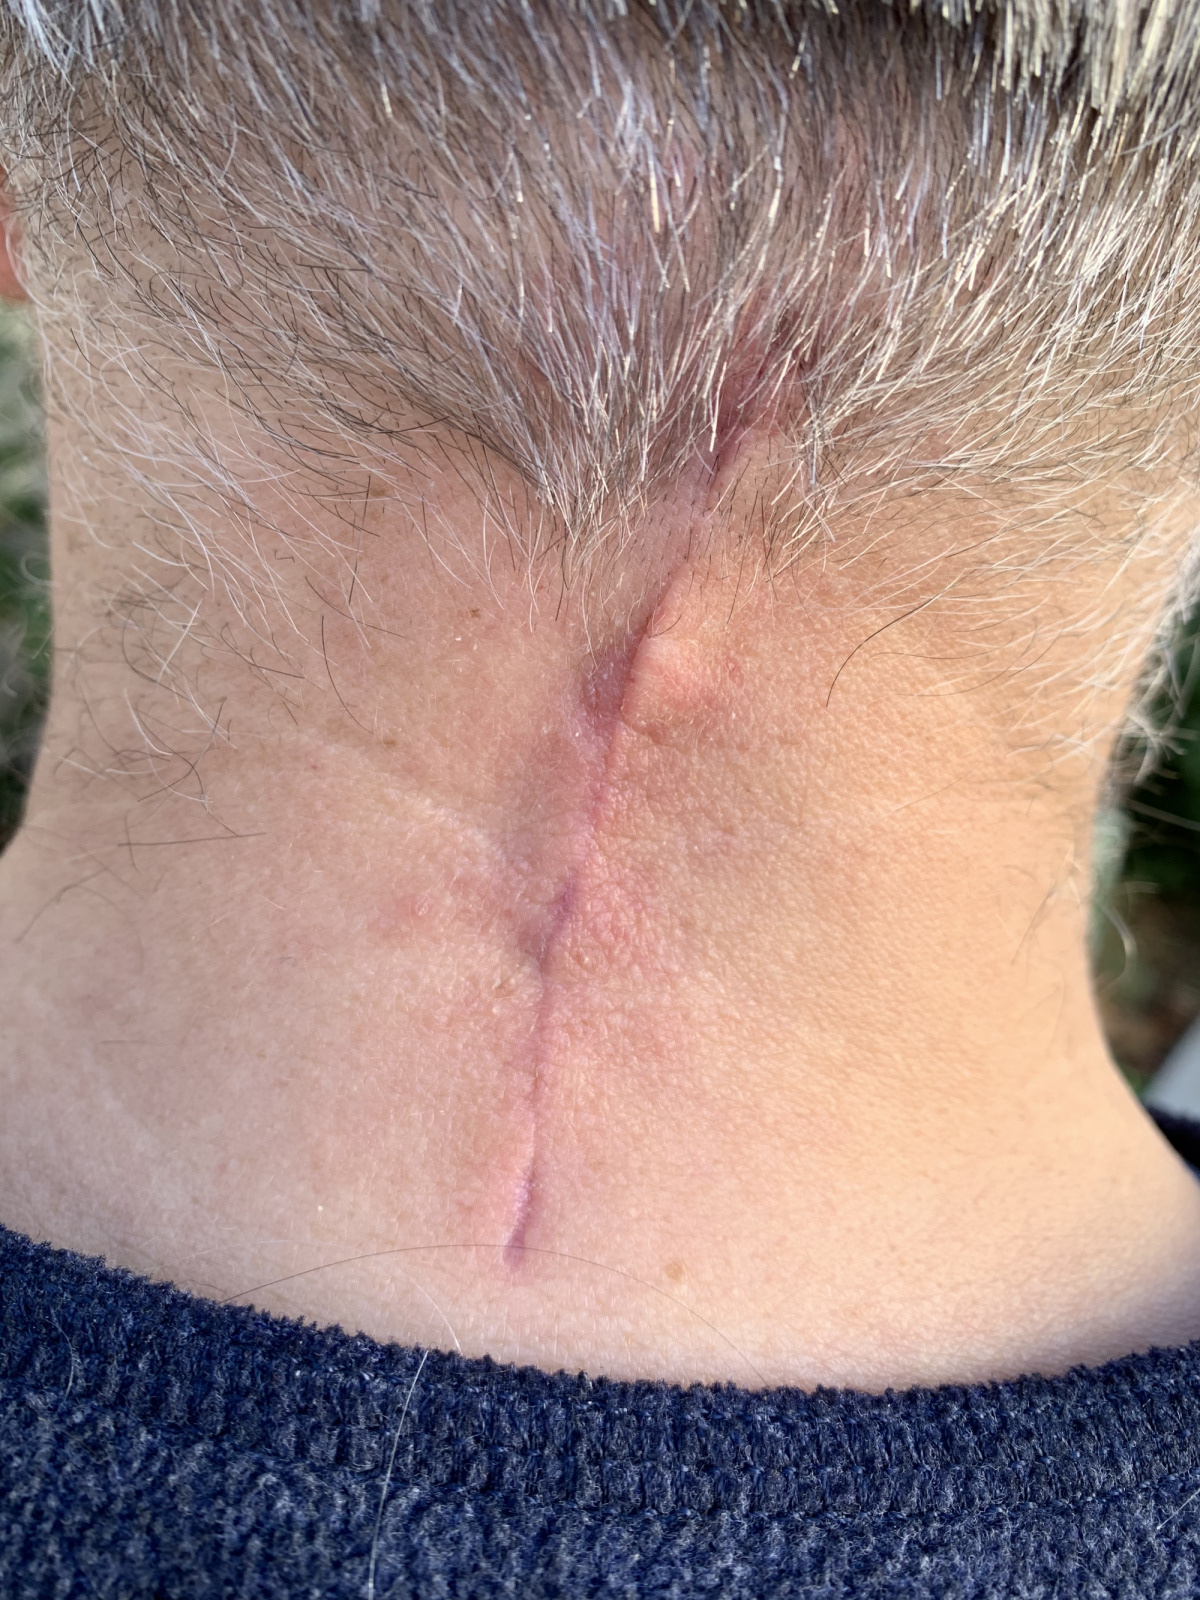 The incision is healing beautifully. The trapezius beneath it will take a little longer. 